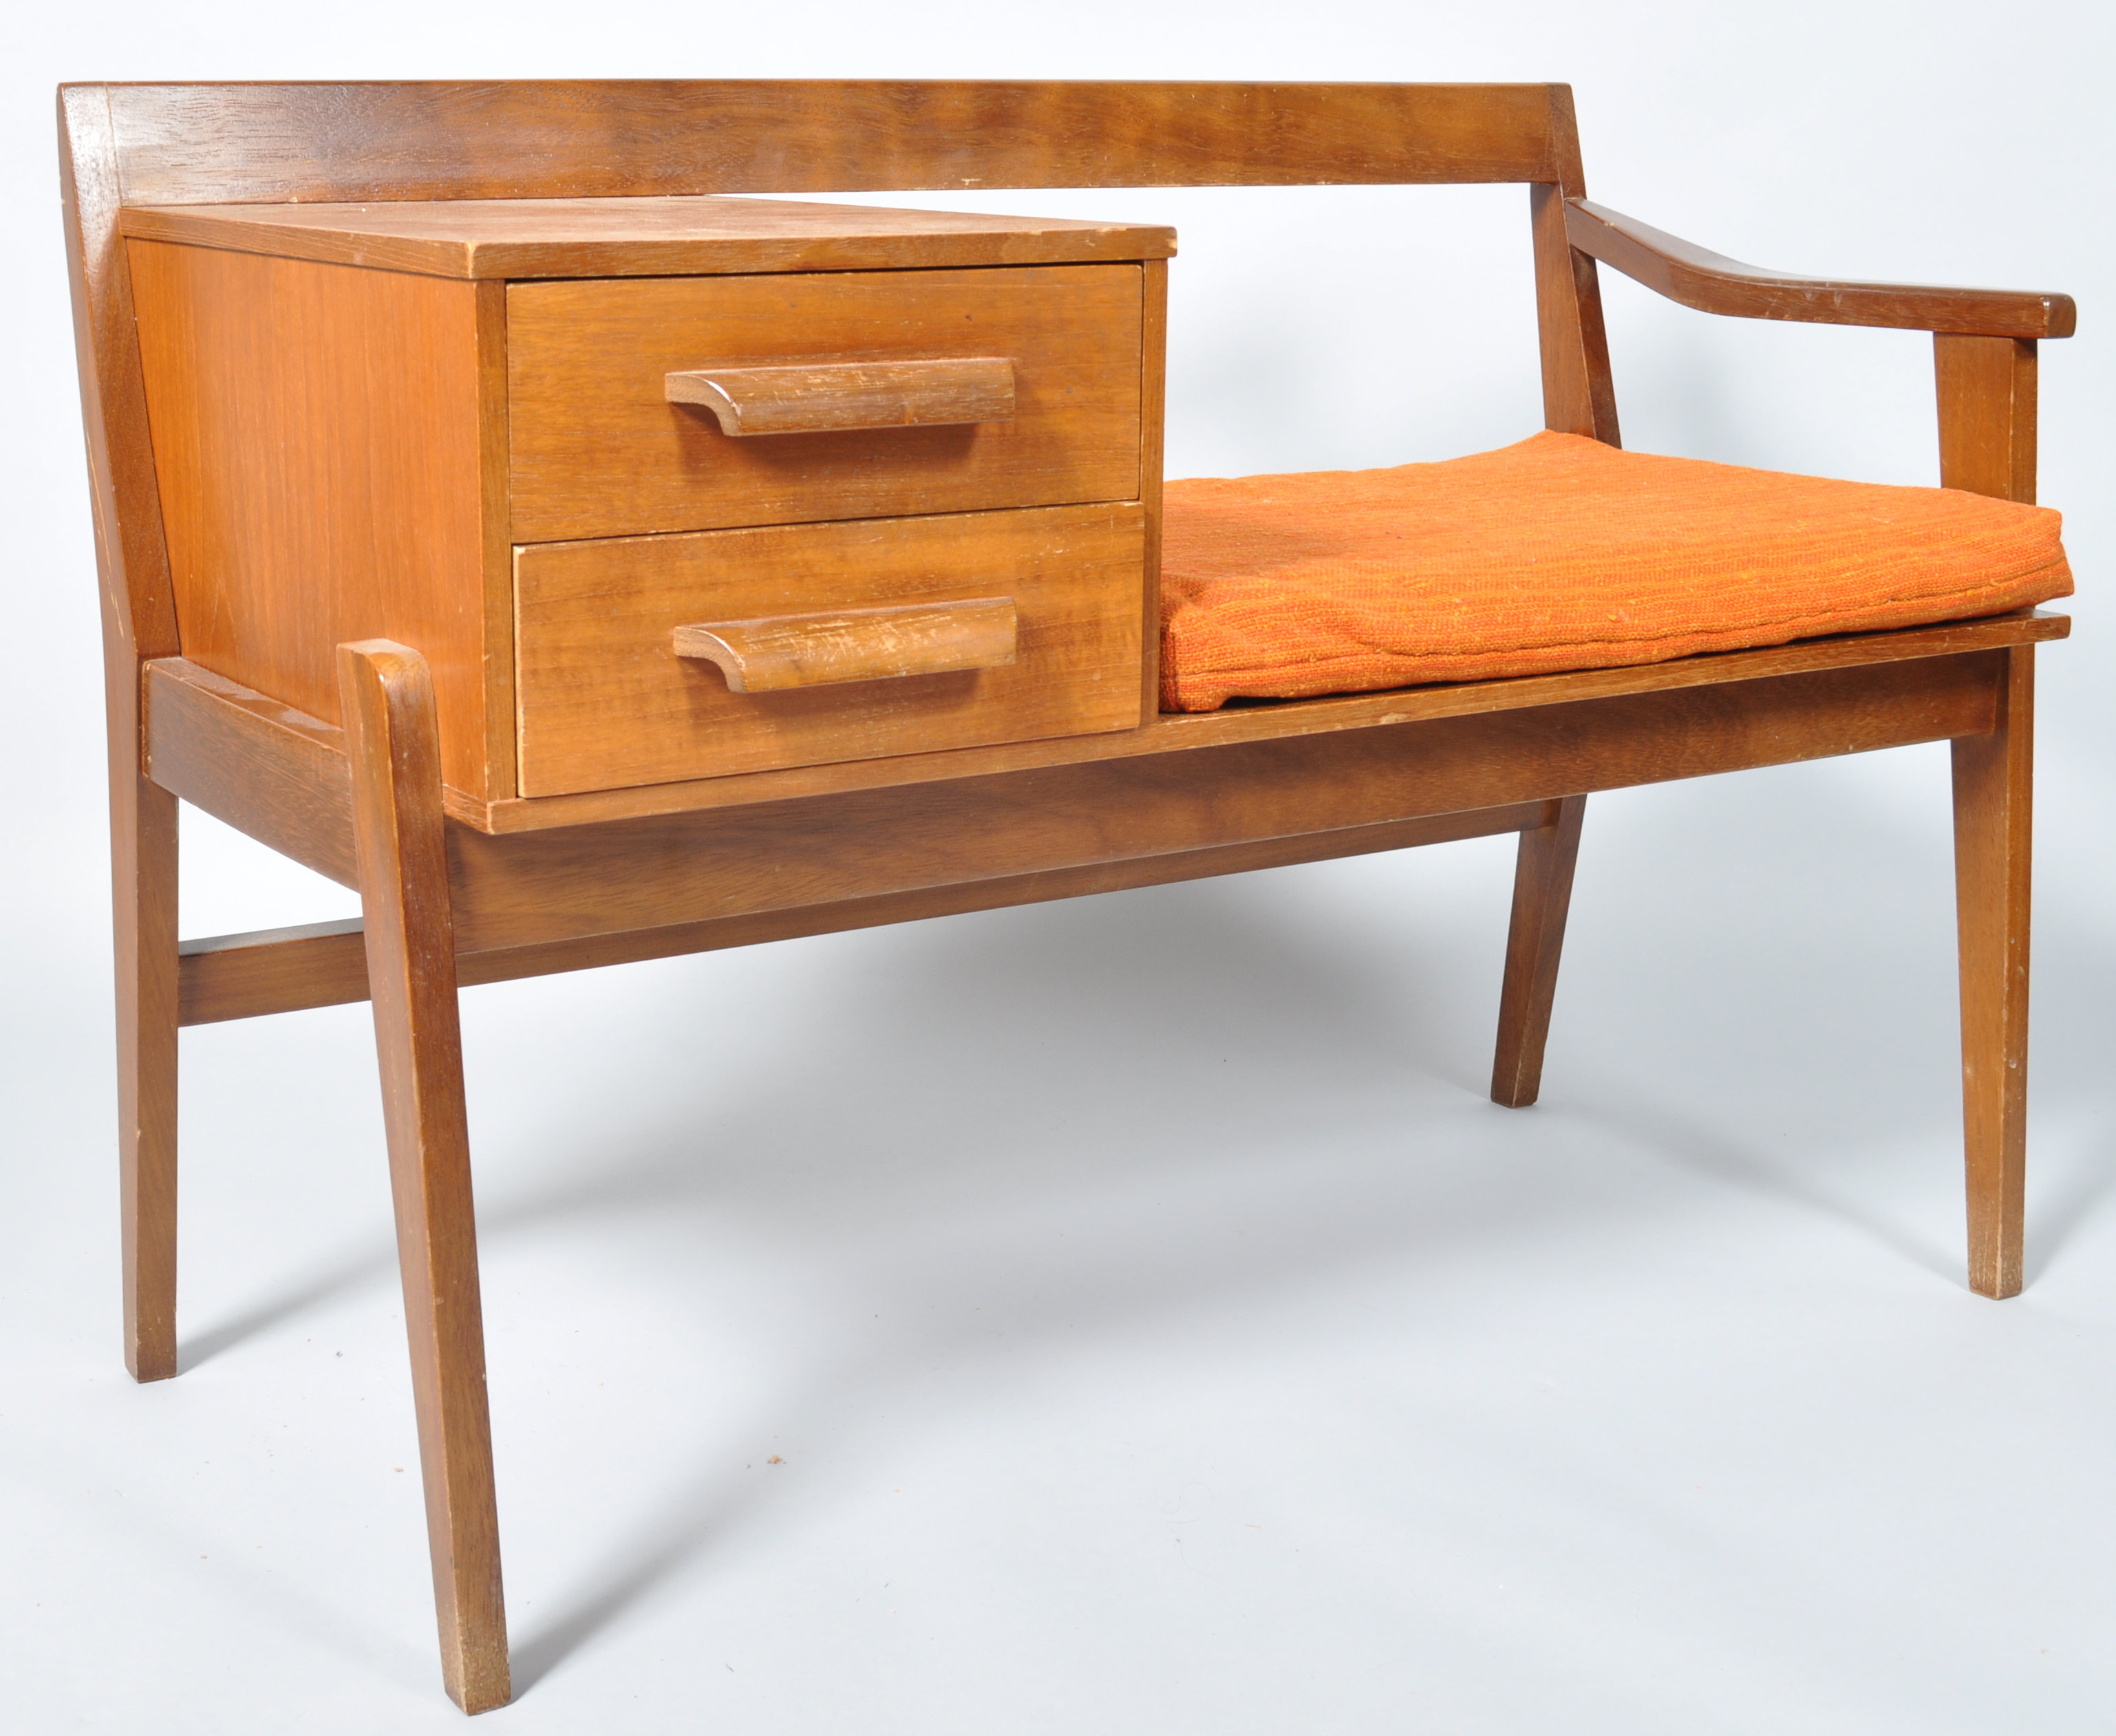 A 1960's retro vintage teak wood telephone table, with two drawers and adjacent seat,